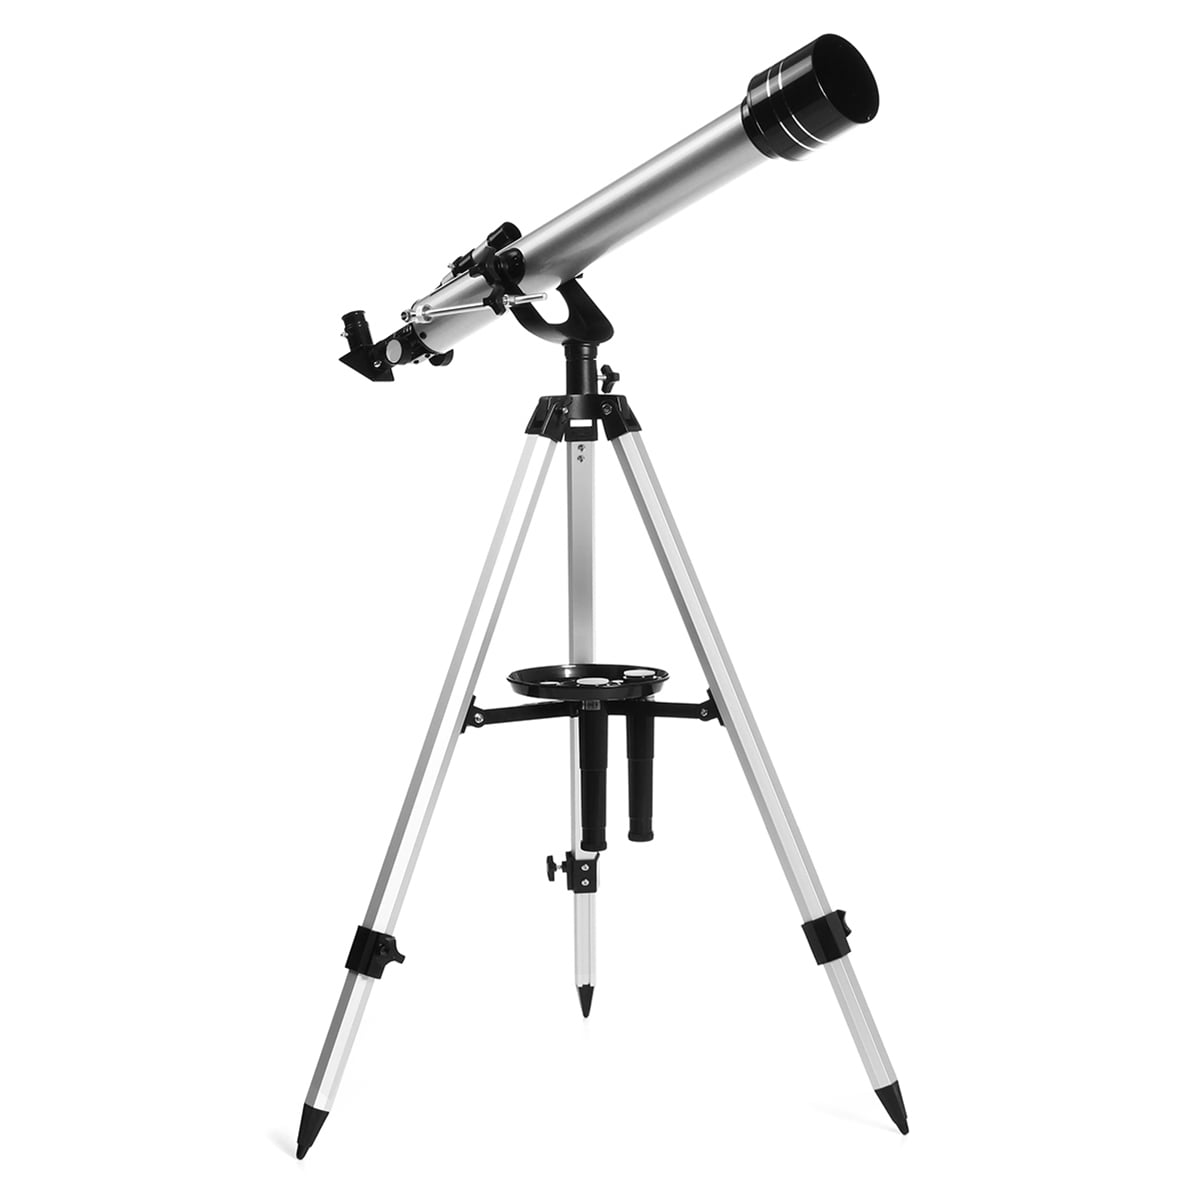 Finder YA BEI SHANGMAO Telescope for Children,Telescope for Beginners,Tripod Refraction Telescope and Tripod Three Magnifying Glasses,Scientific Toys 